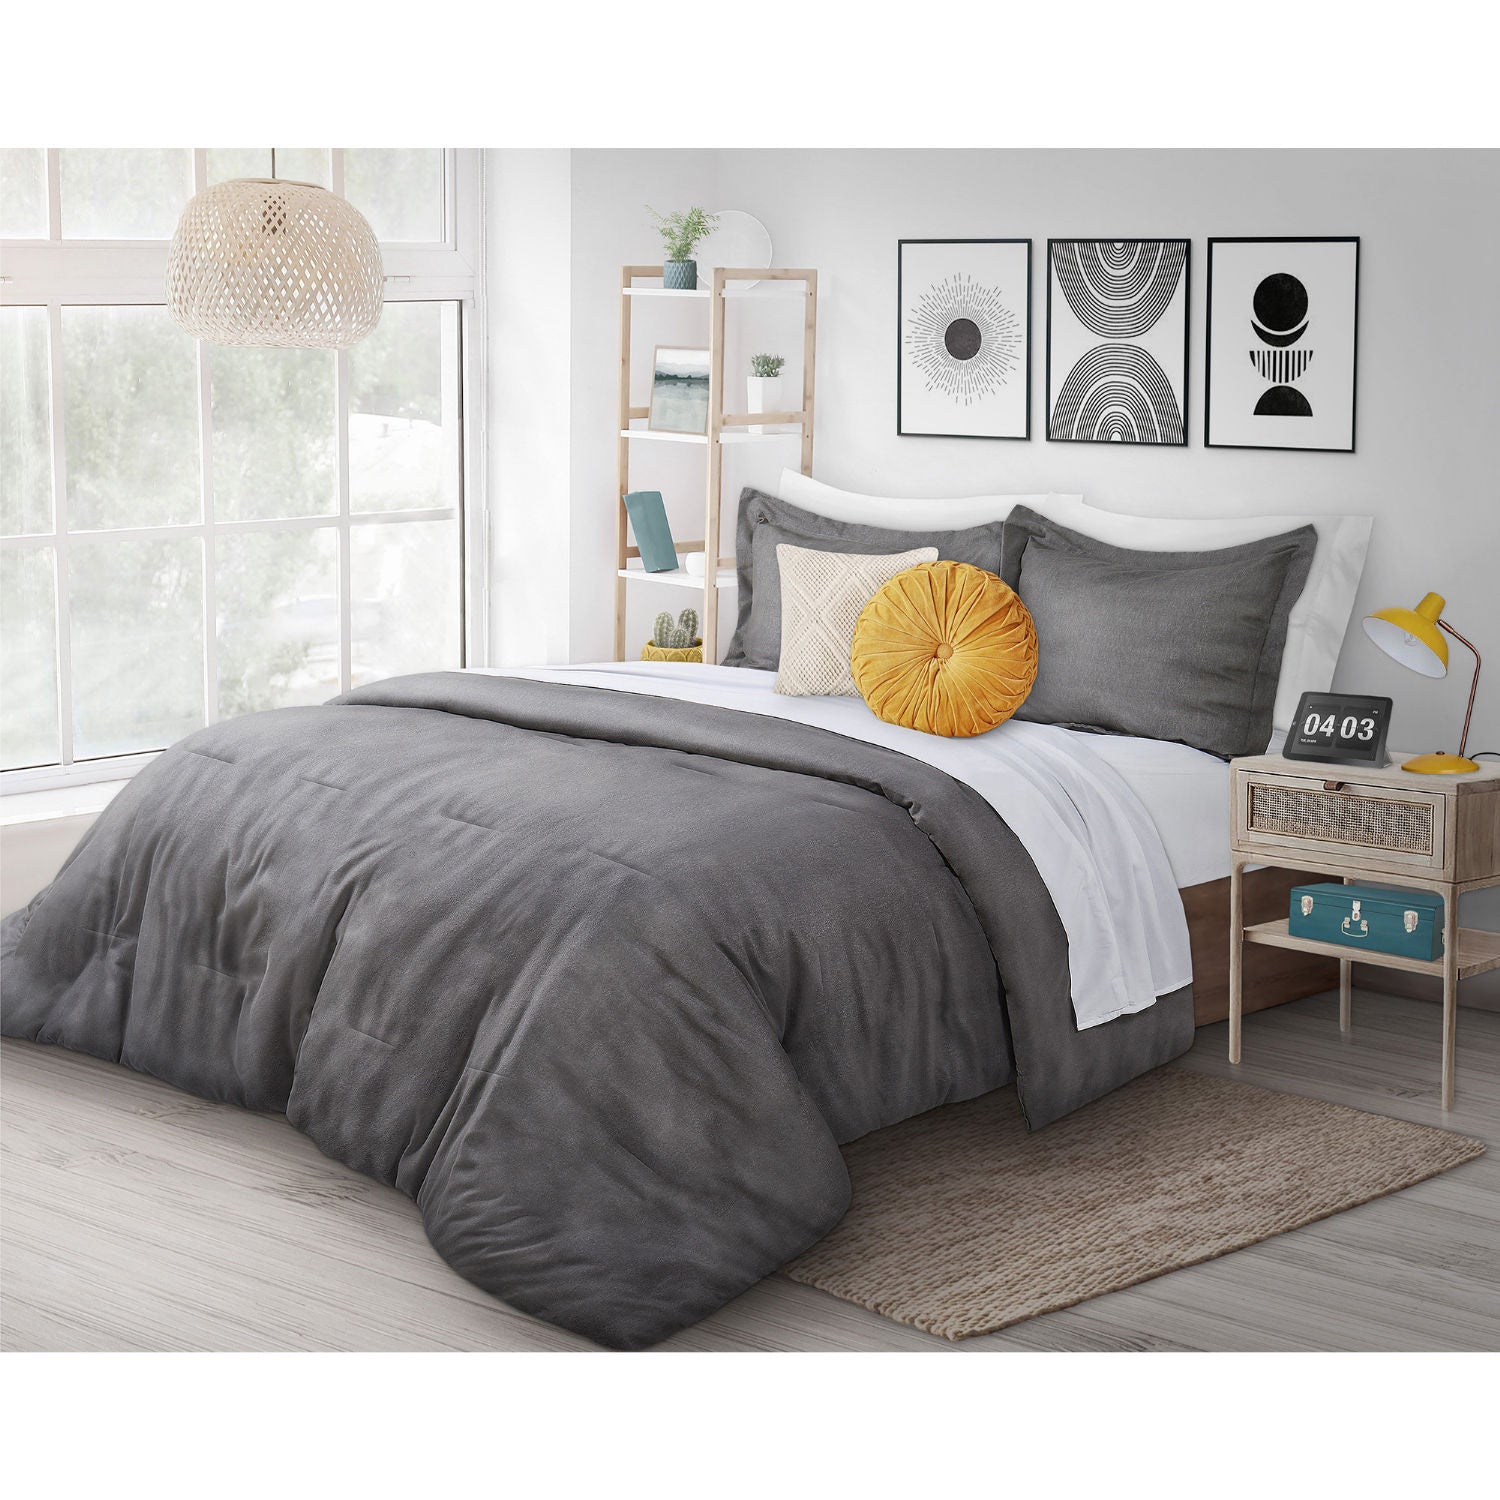 Woven Heathered Flannel Comforter 2 Pc Set Dq. Grey